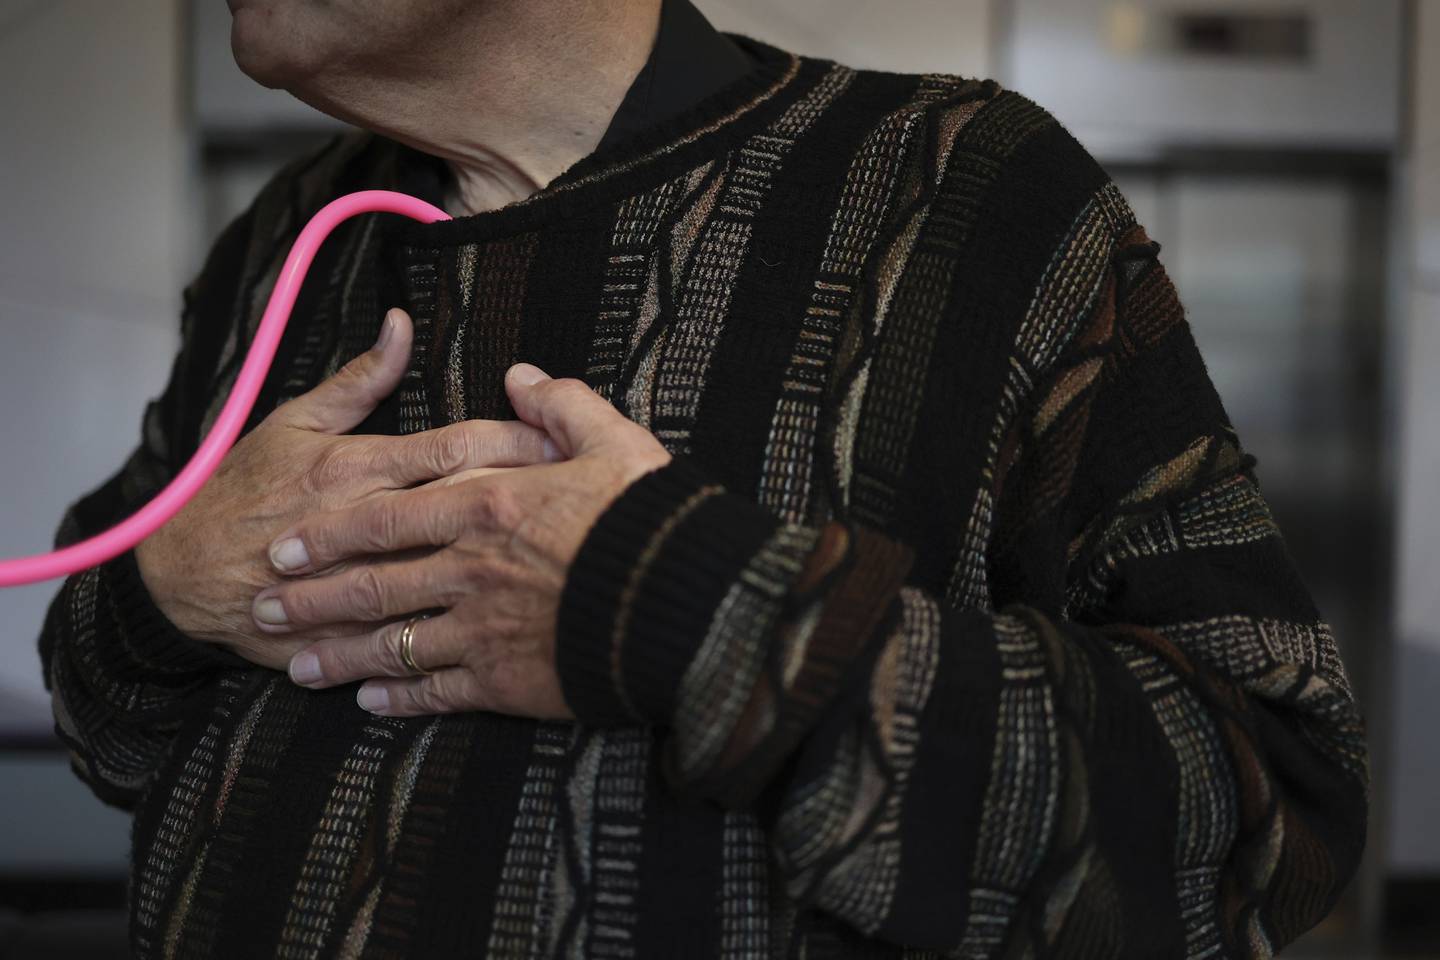 Amber Morgan listens to her daughters heart beat in Tom Johnson as he puts his hands over his heart on Nov. 19, 2022.